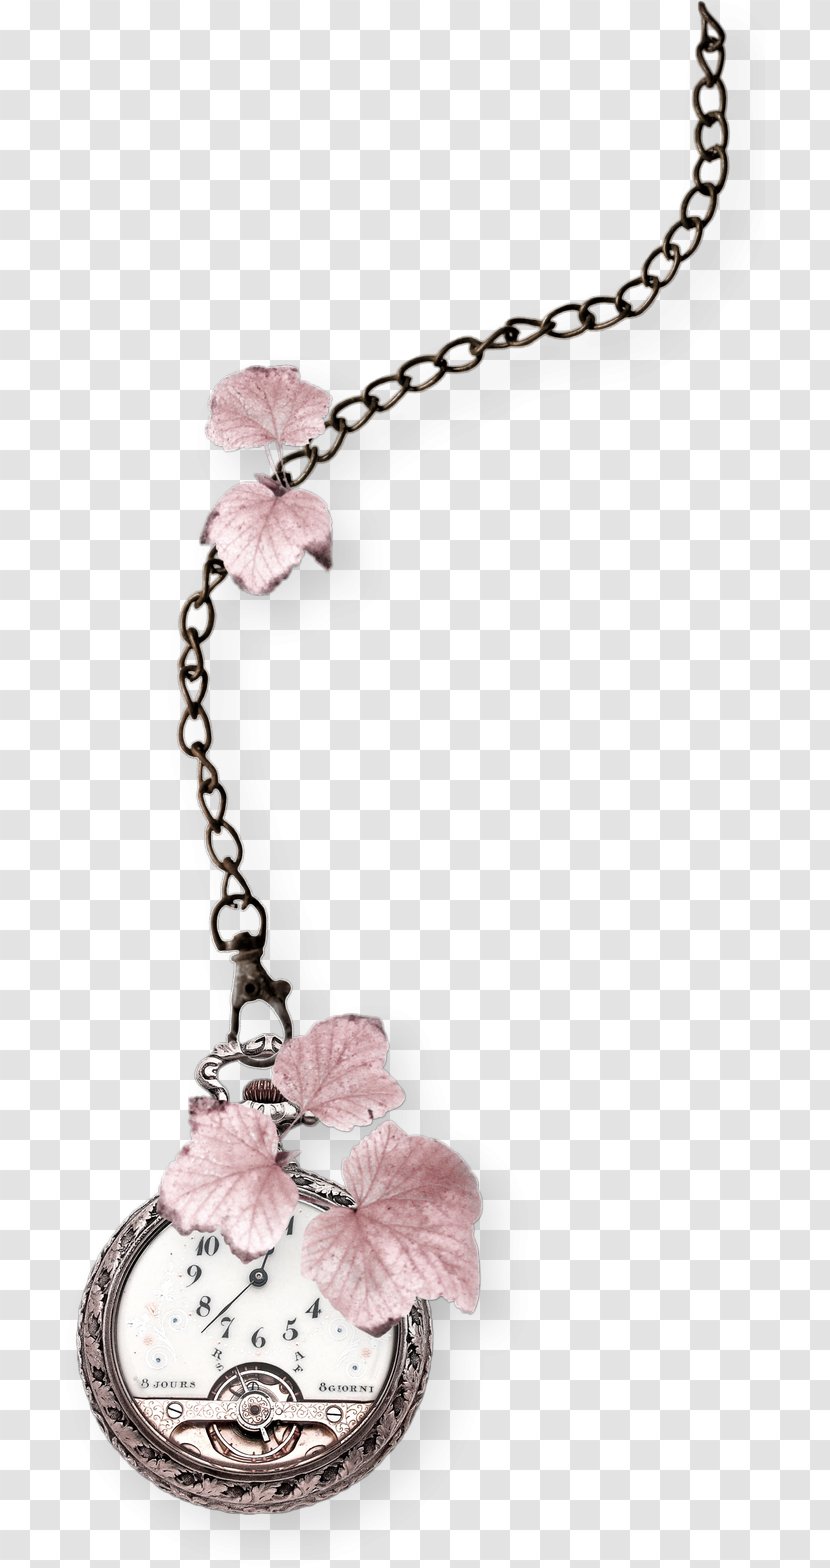 Chain Pocket Watch Jewellery Clothing Accessories - Petal Transparent PNG